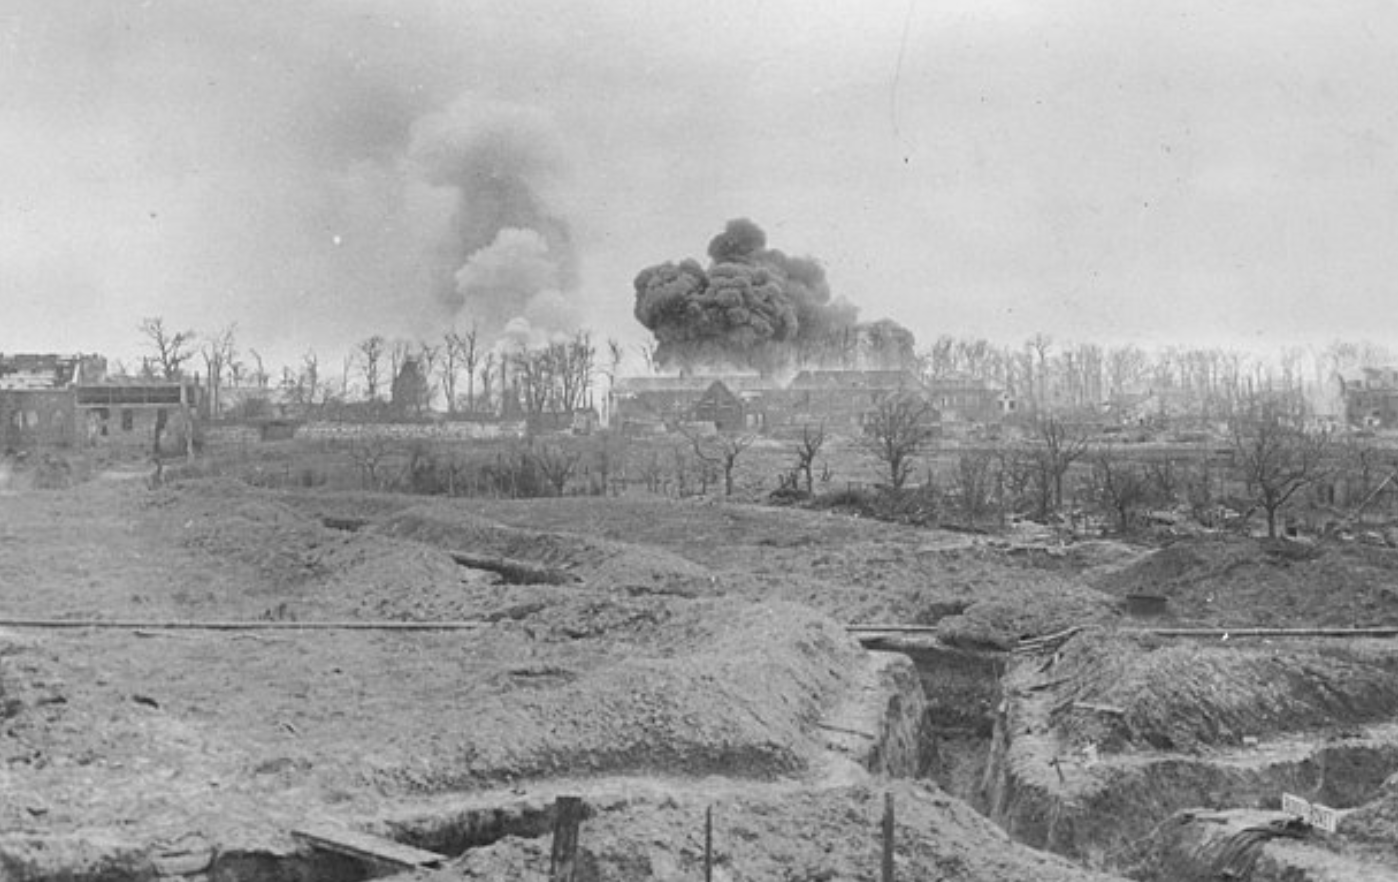 A series of trenches in a French war zone during World War I; smoke is billowing from several buildings which have been damaged by bombs or fire.